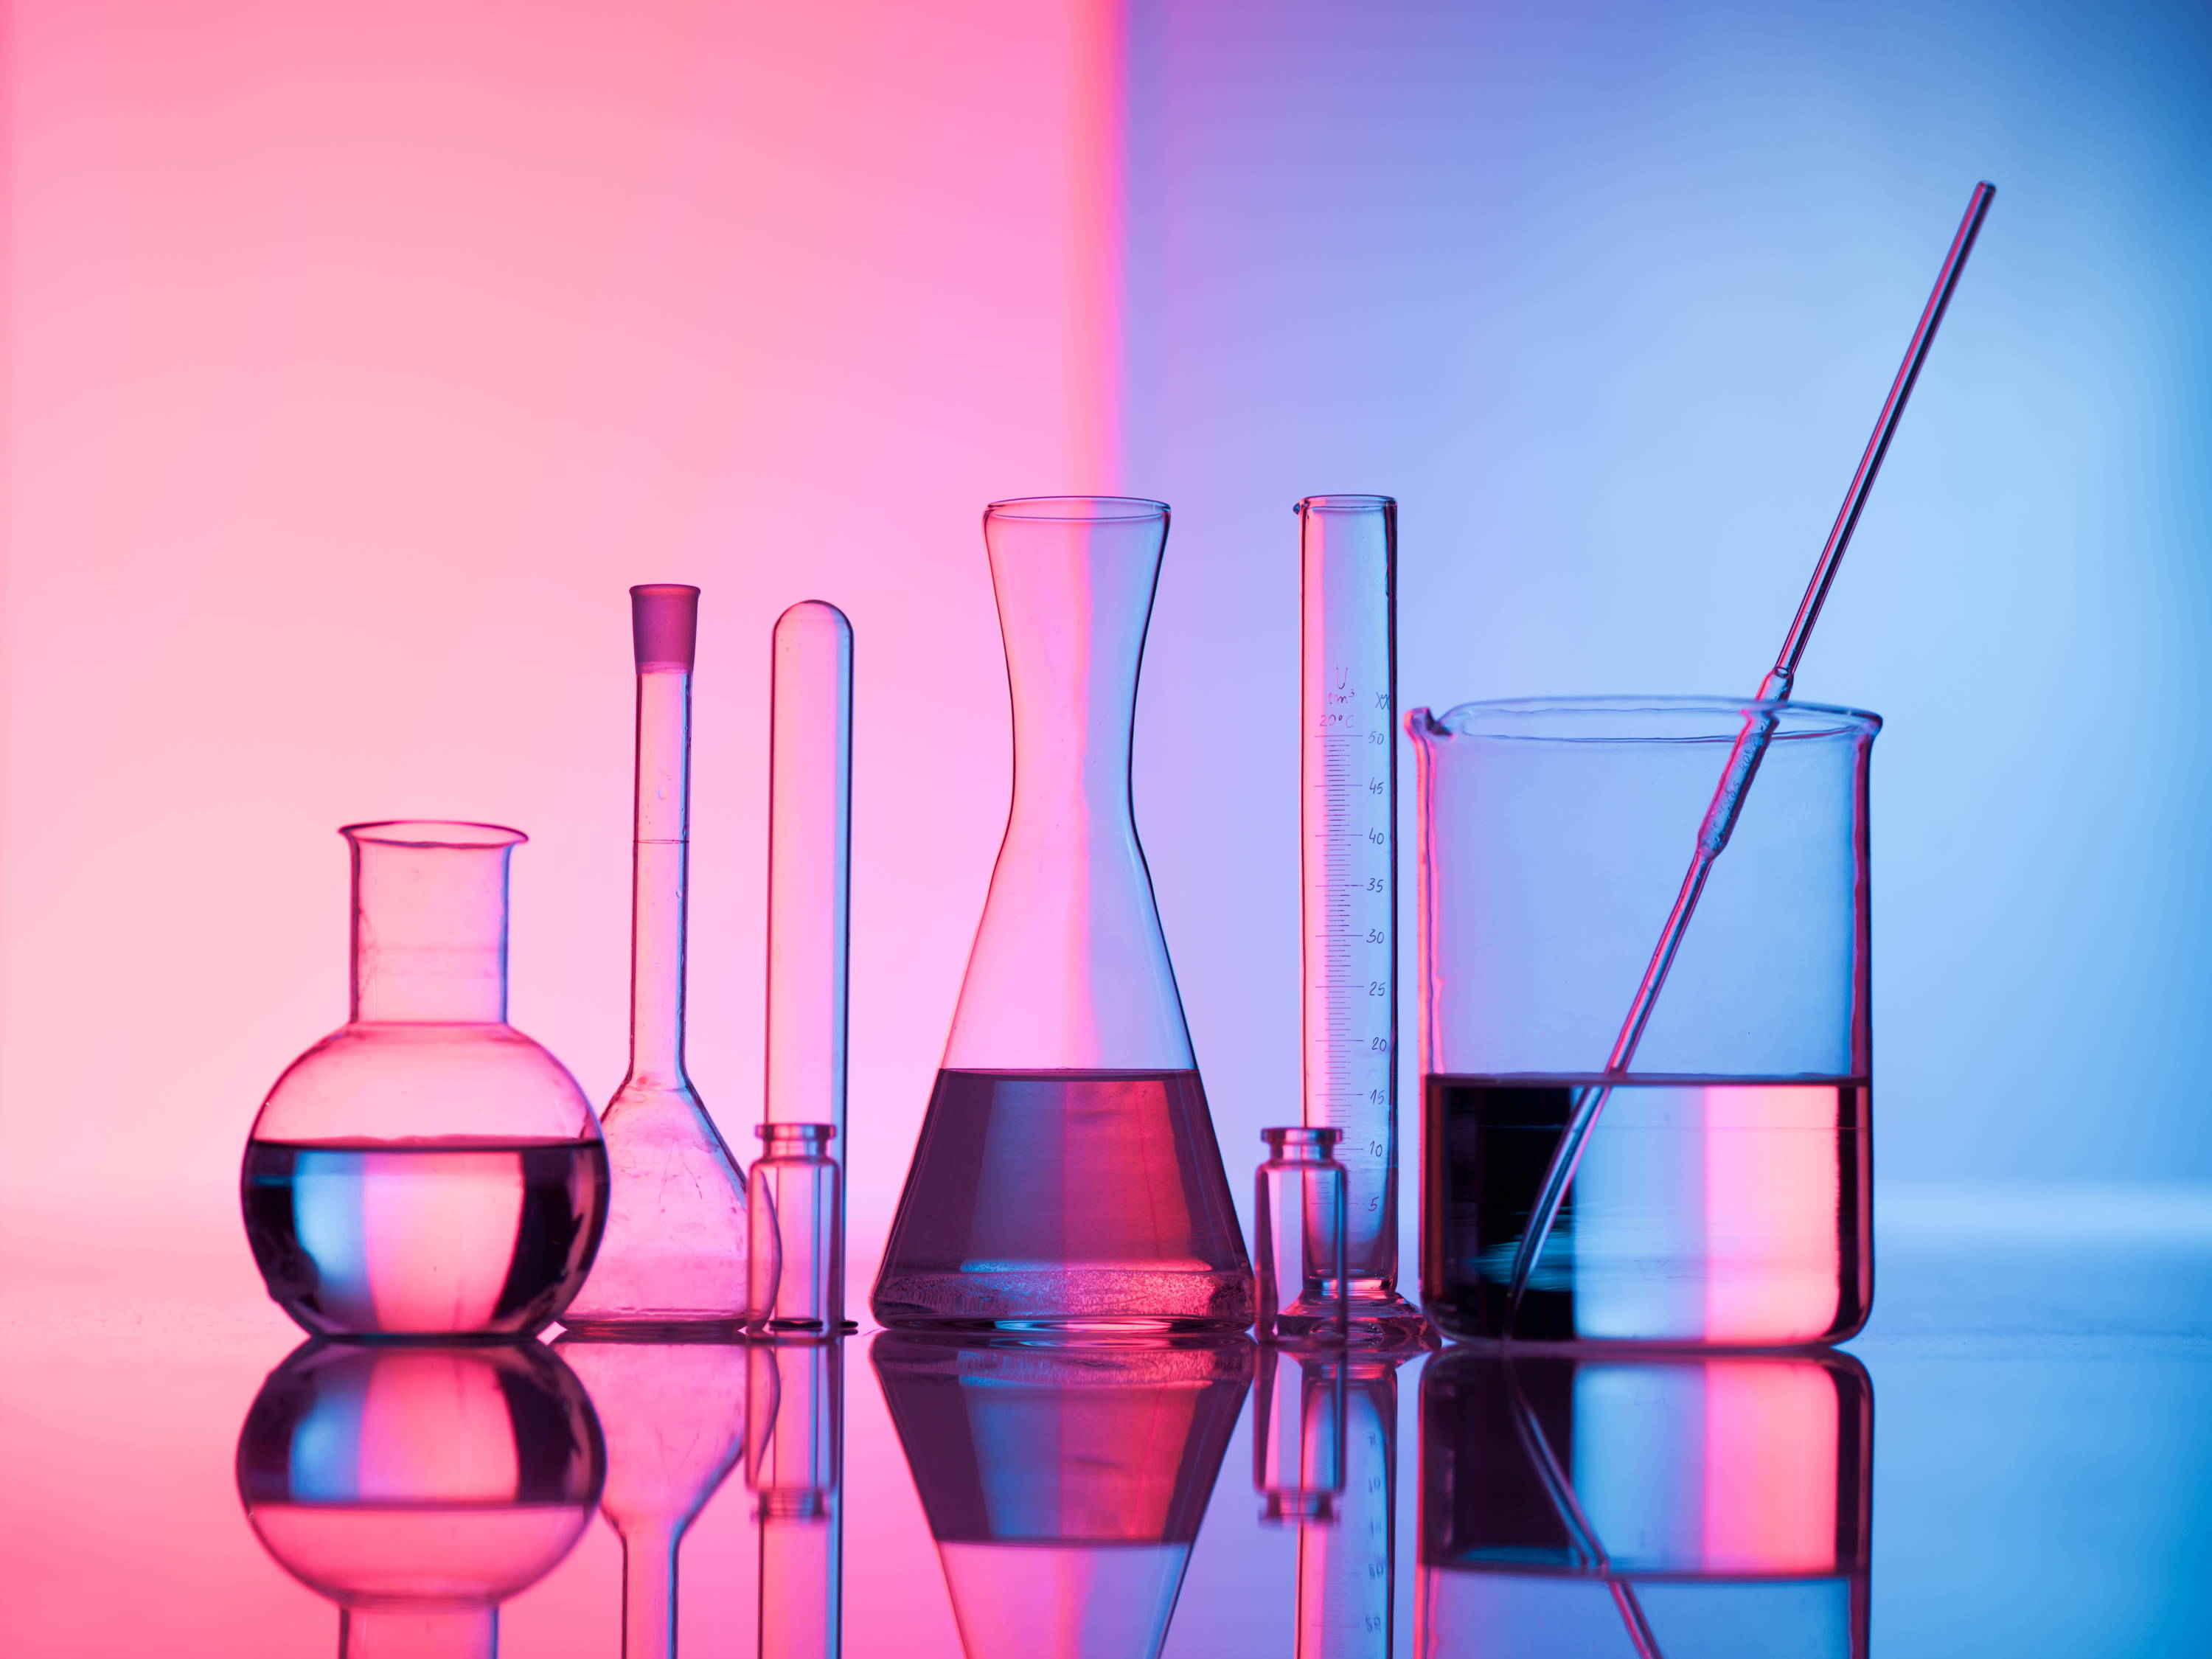 Beakers in a laboratory